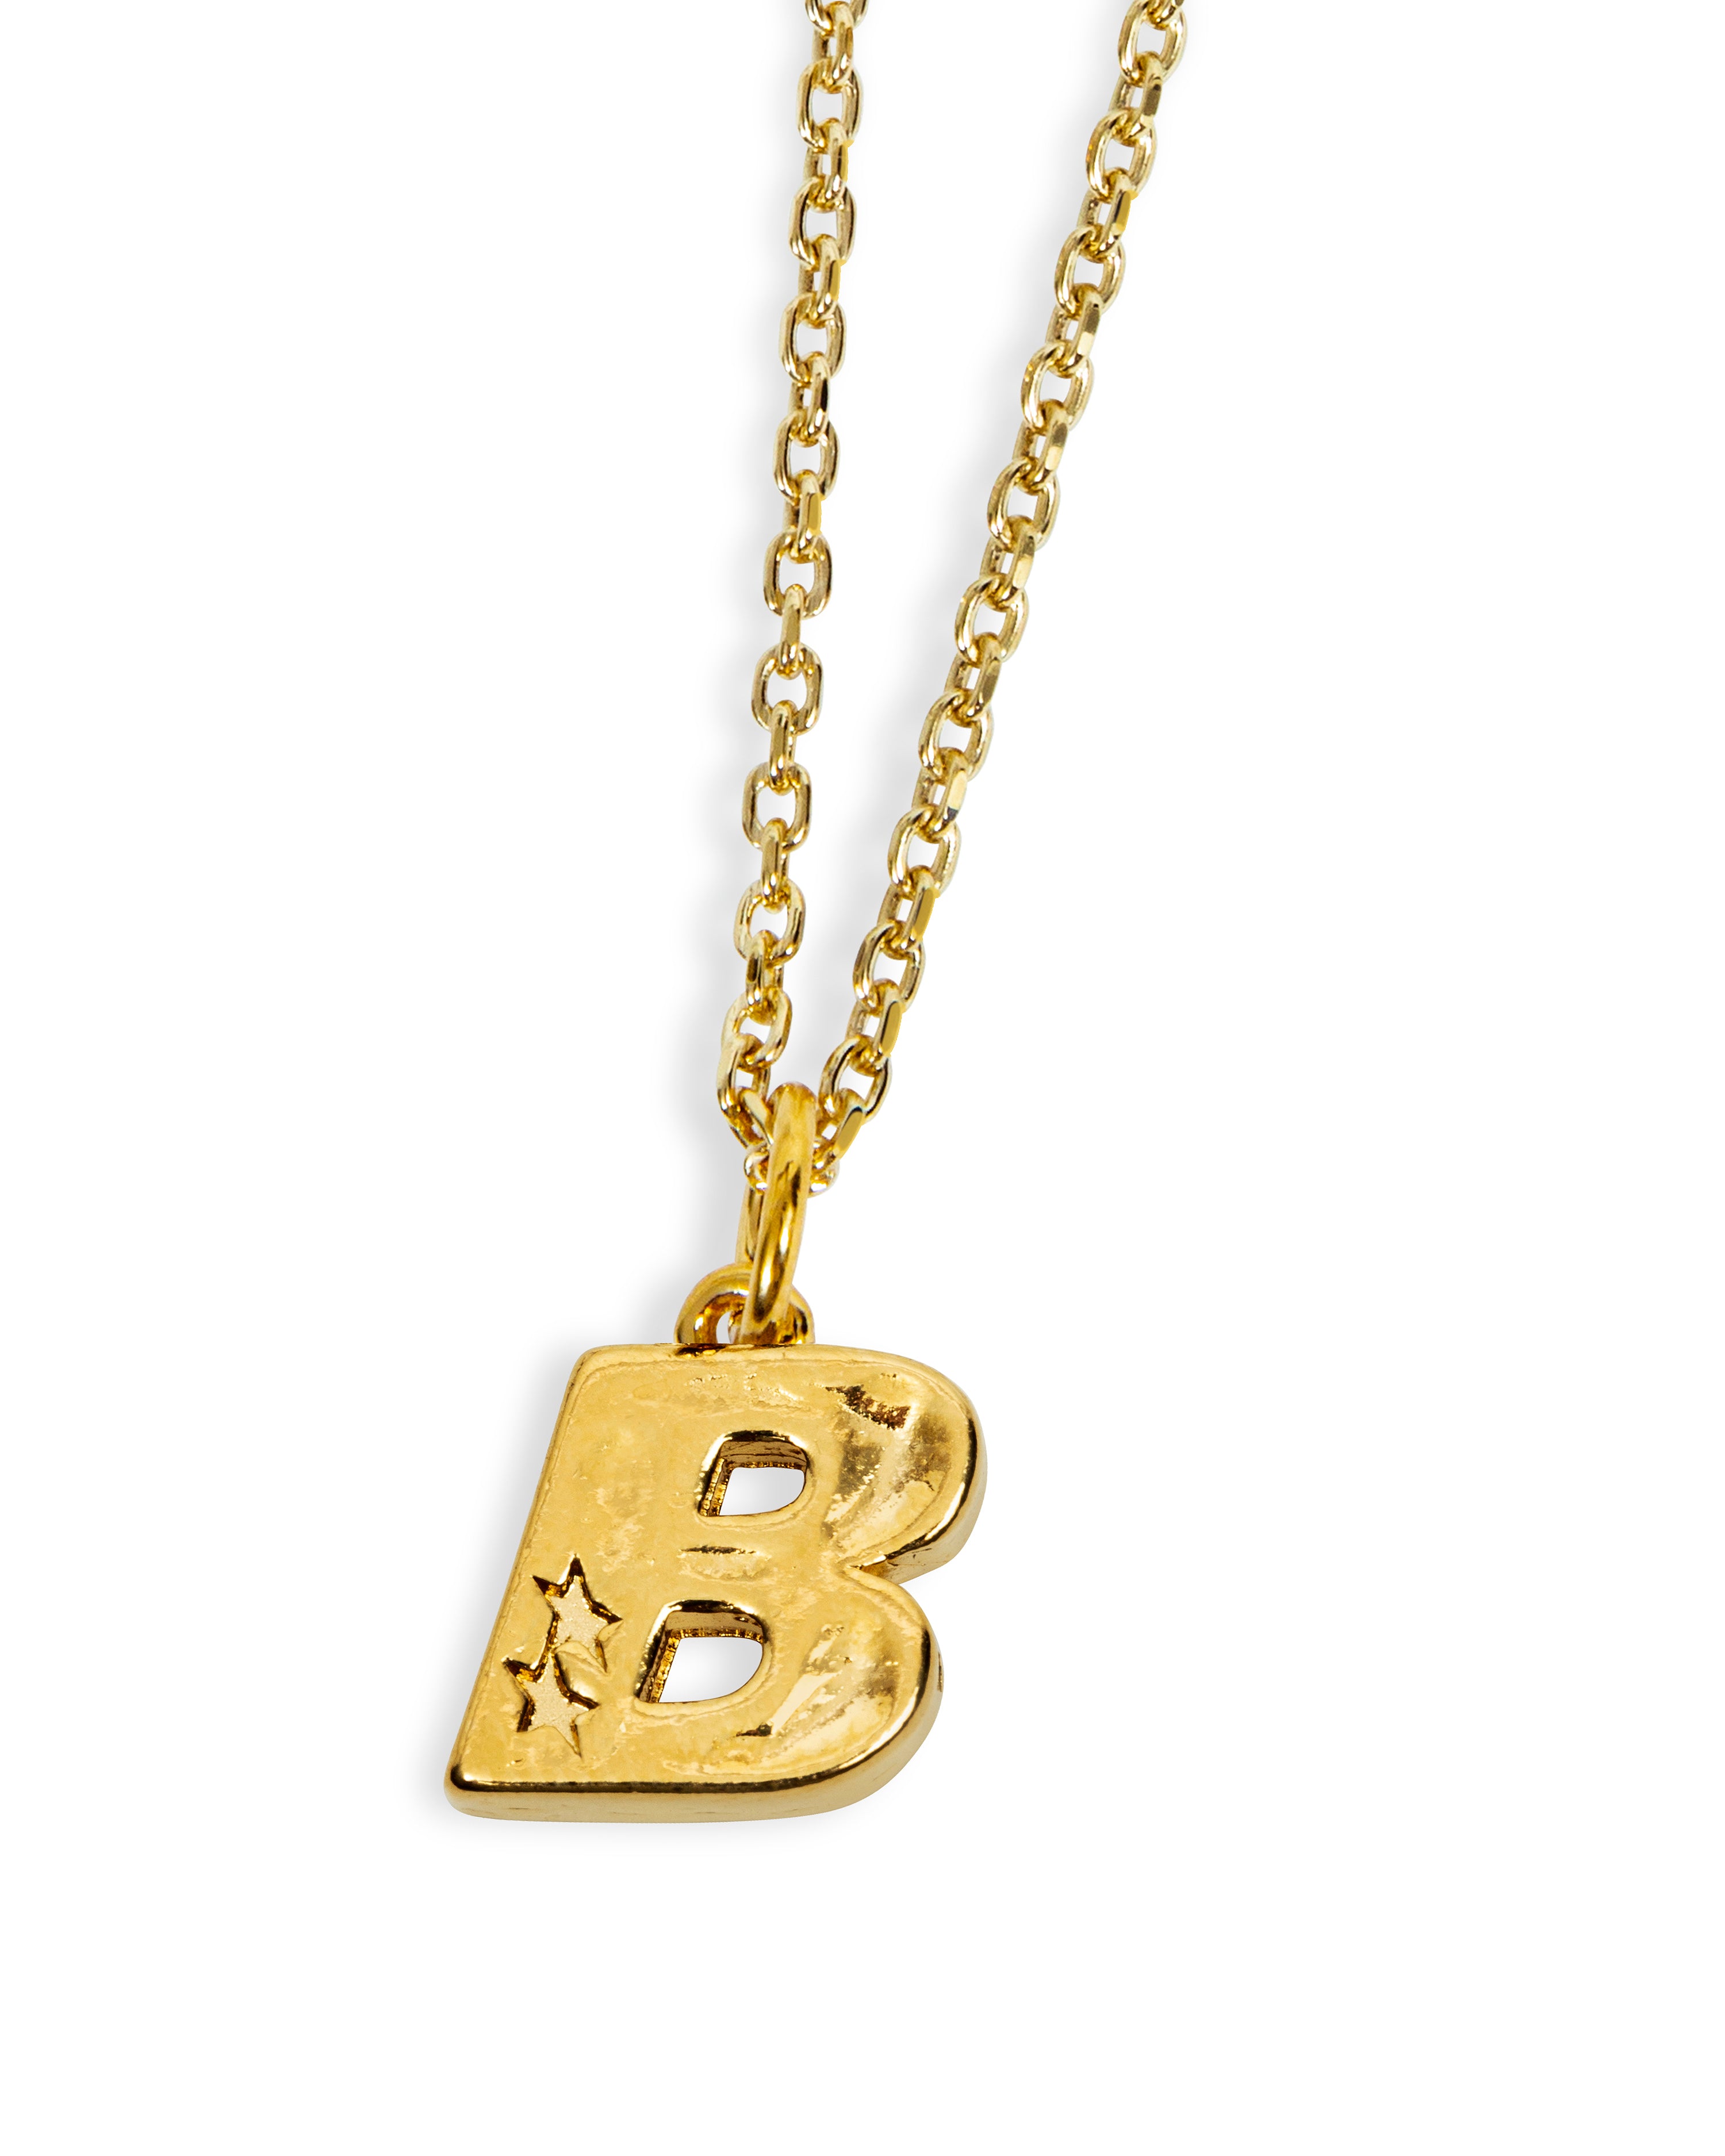 B Initial Pendant in 10kt Yellow Gold